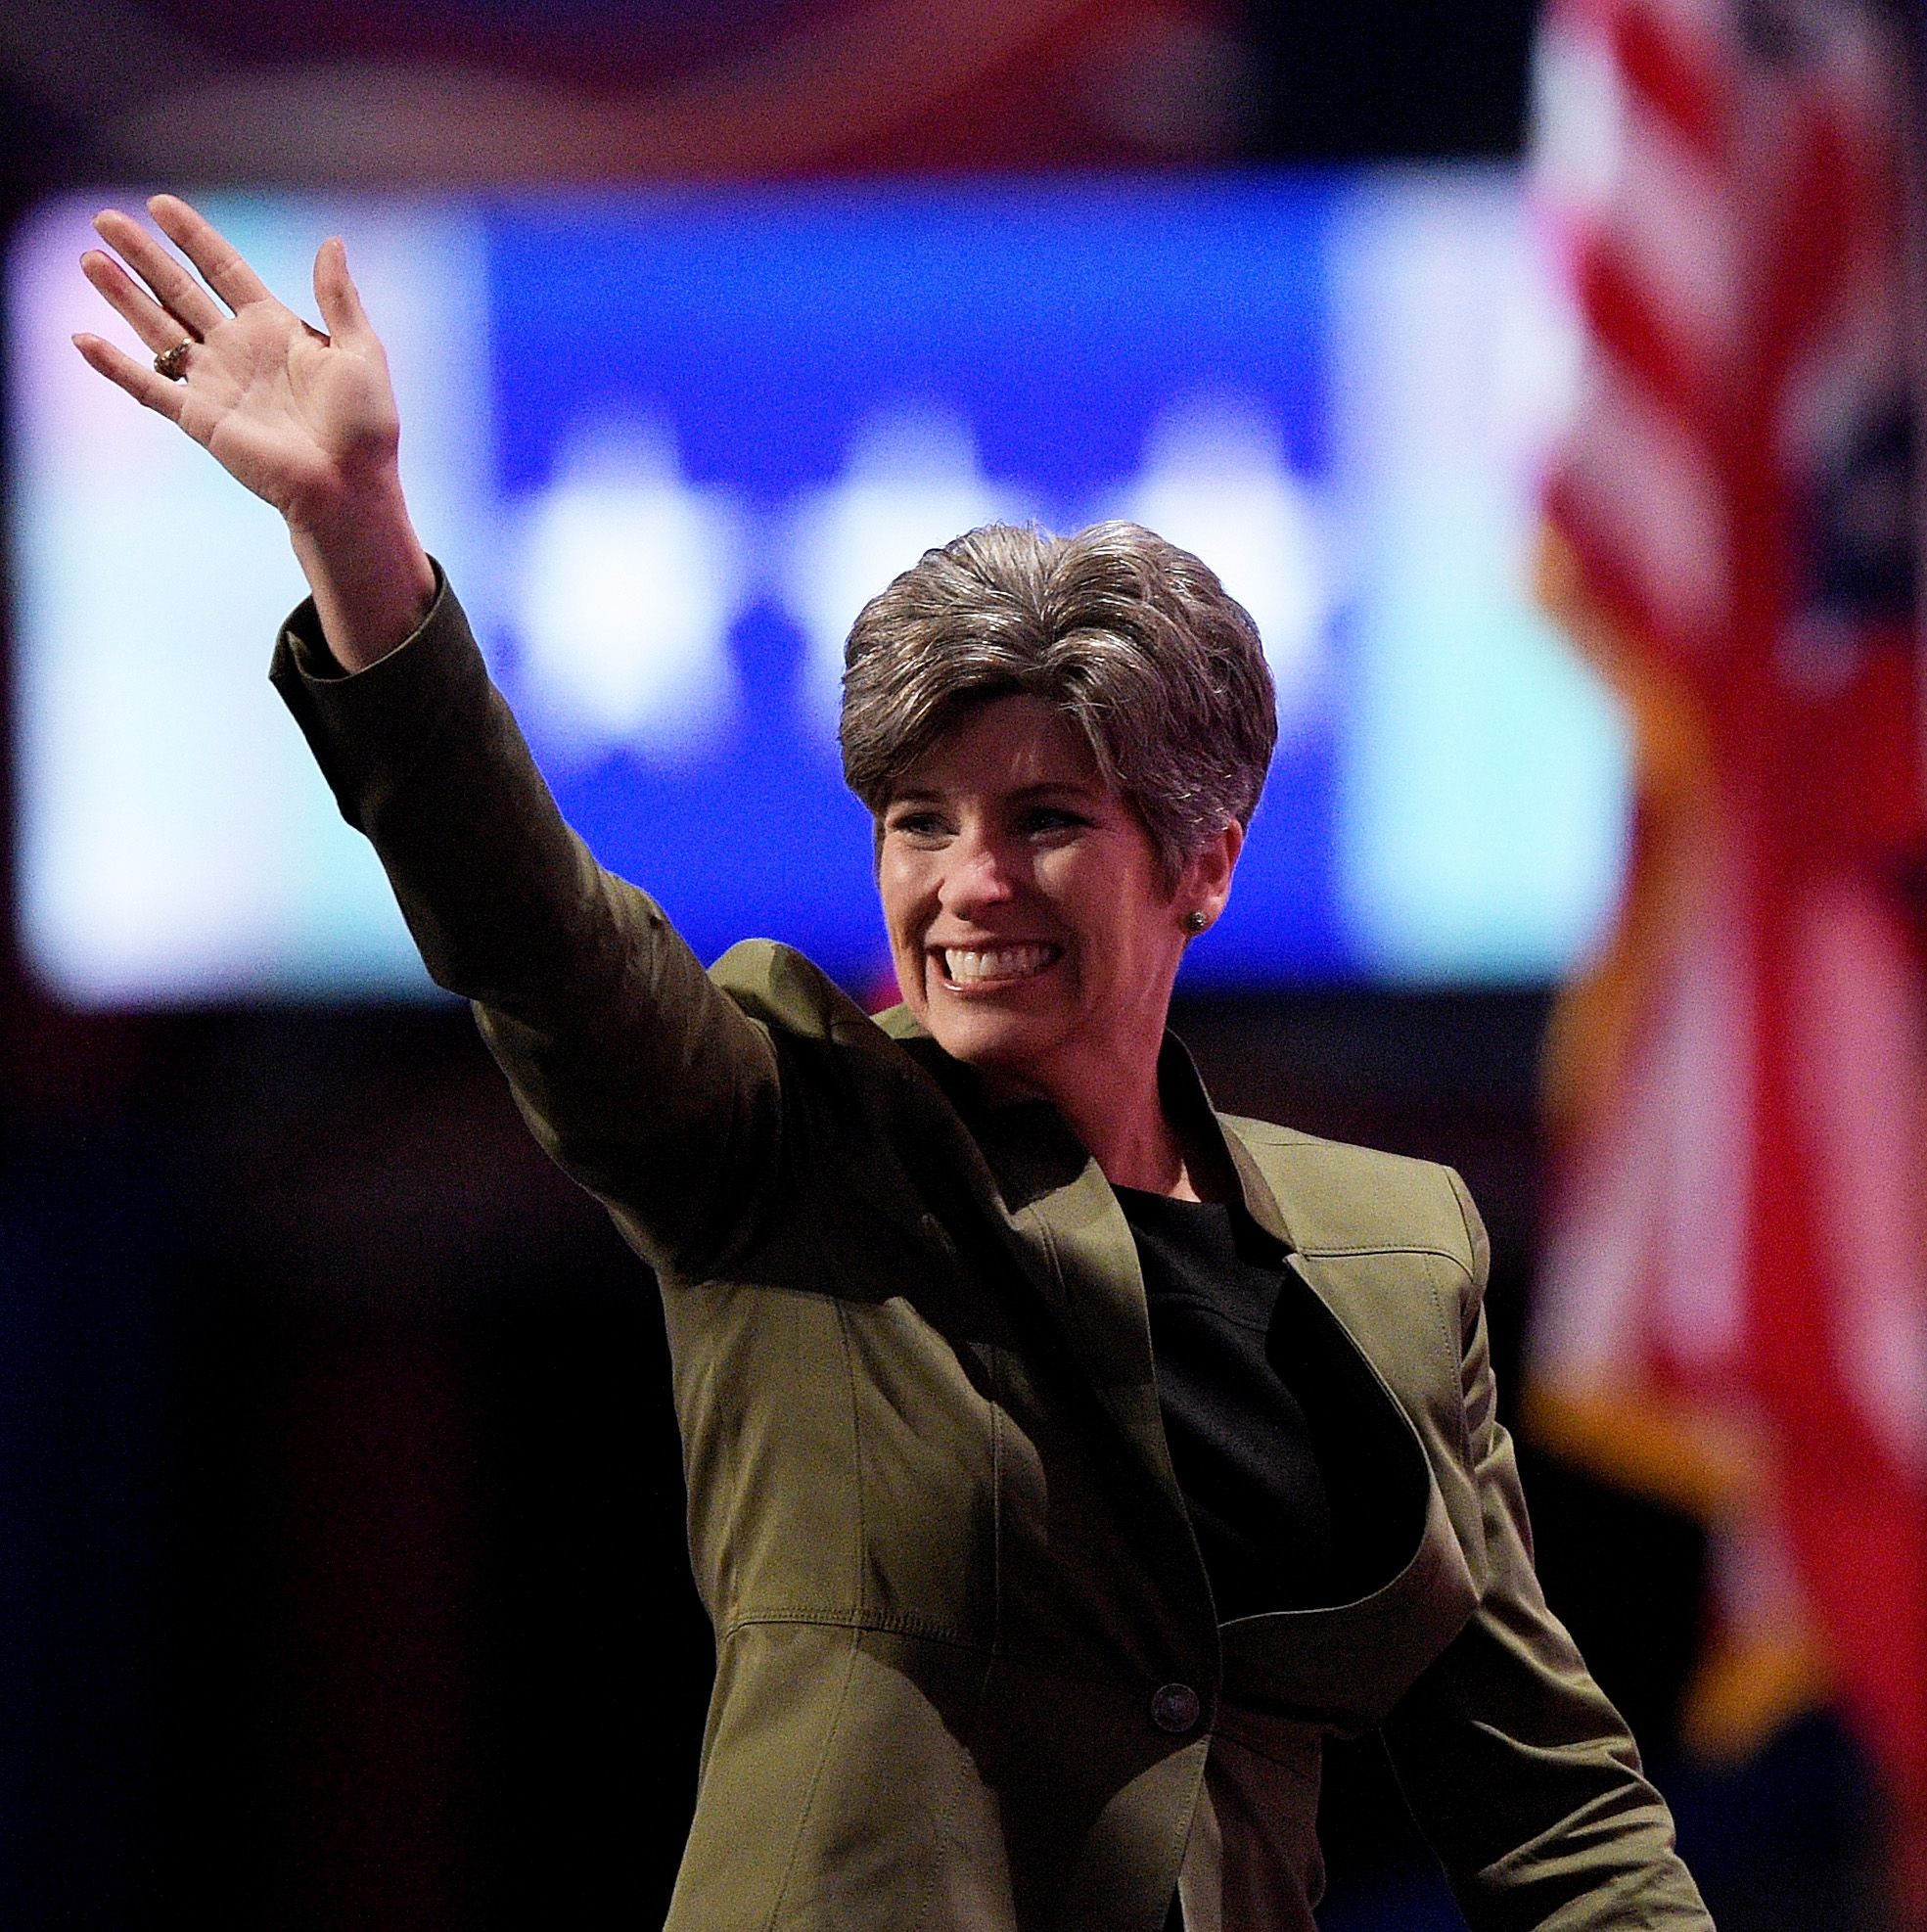 Iowa Poll: Joni Ernst's approval rating hits new high as she readies for 2020 re-election bid